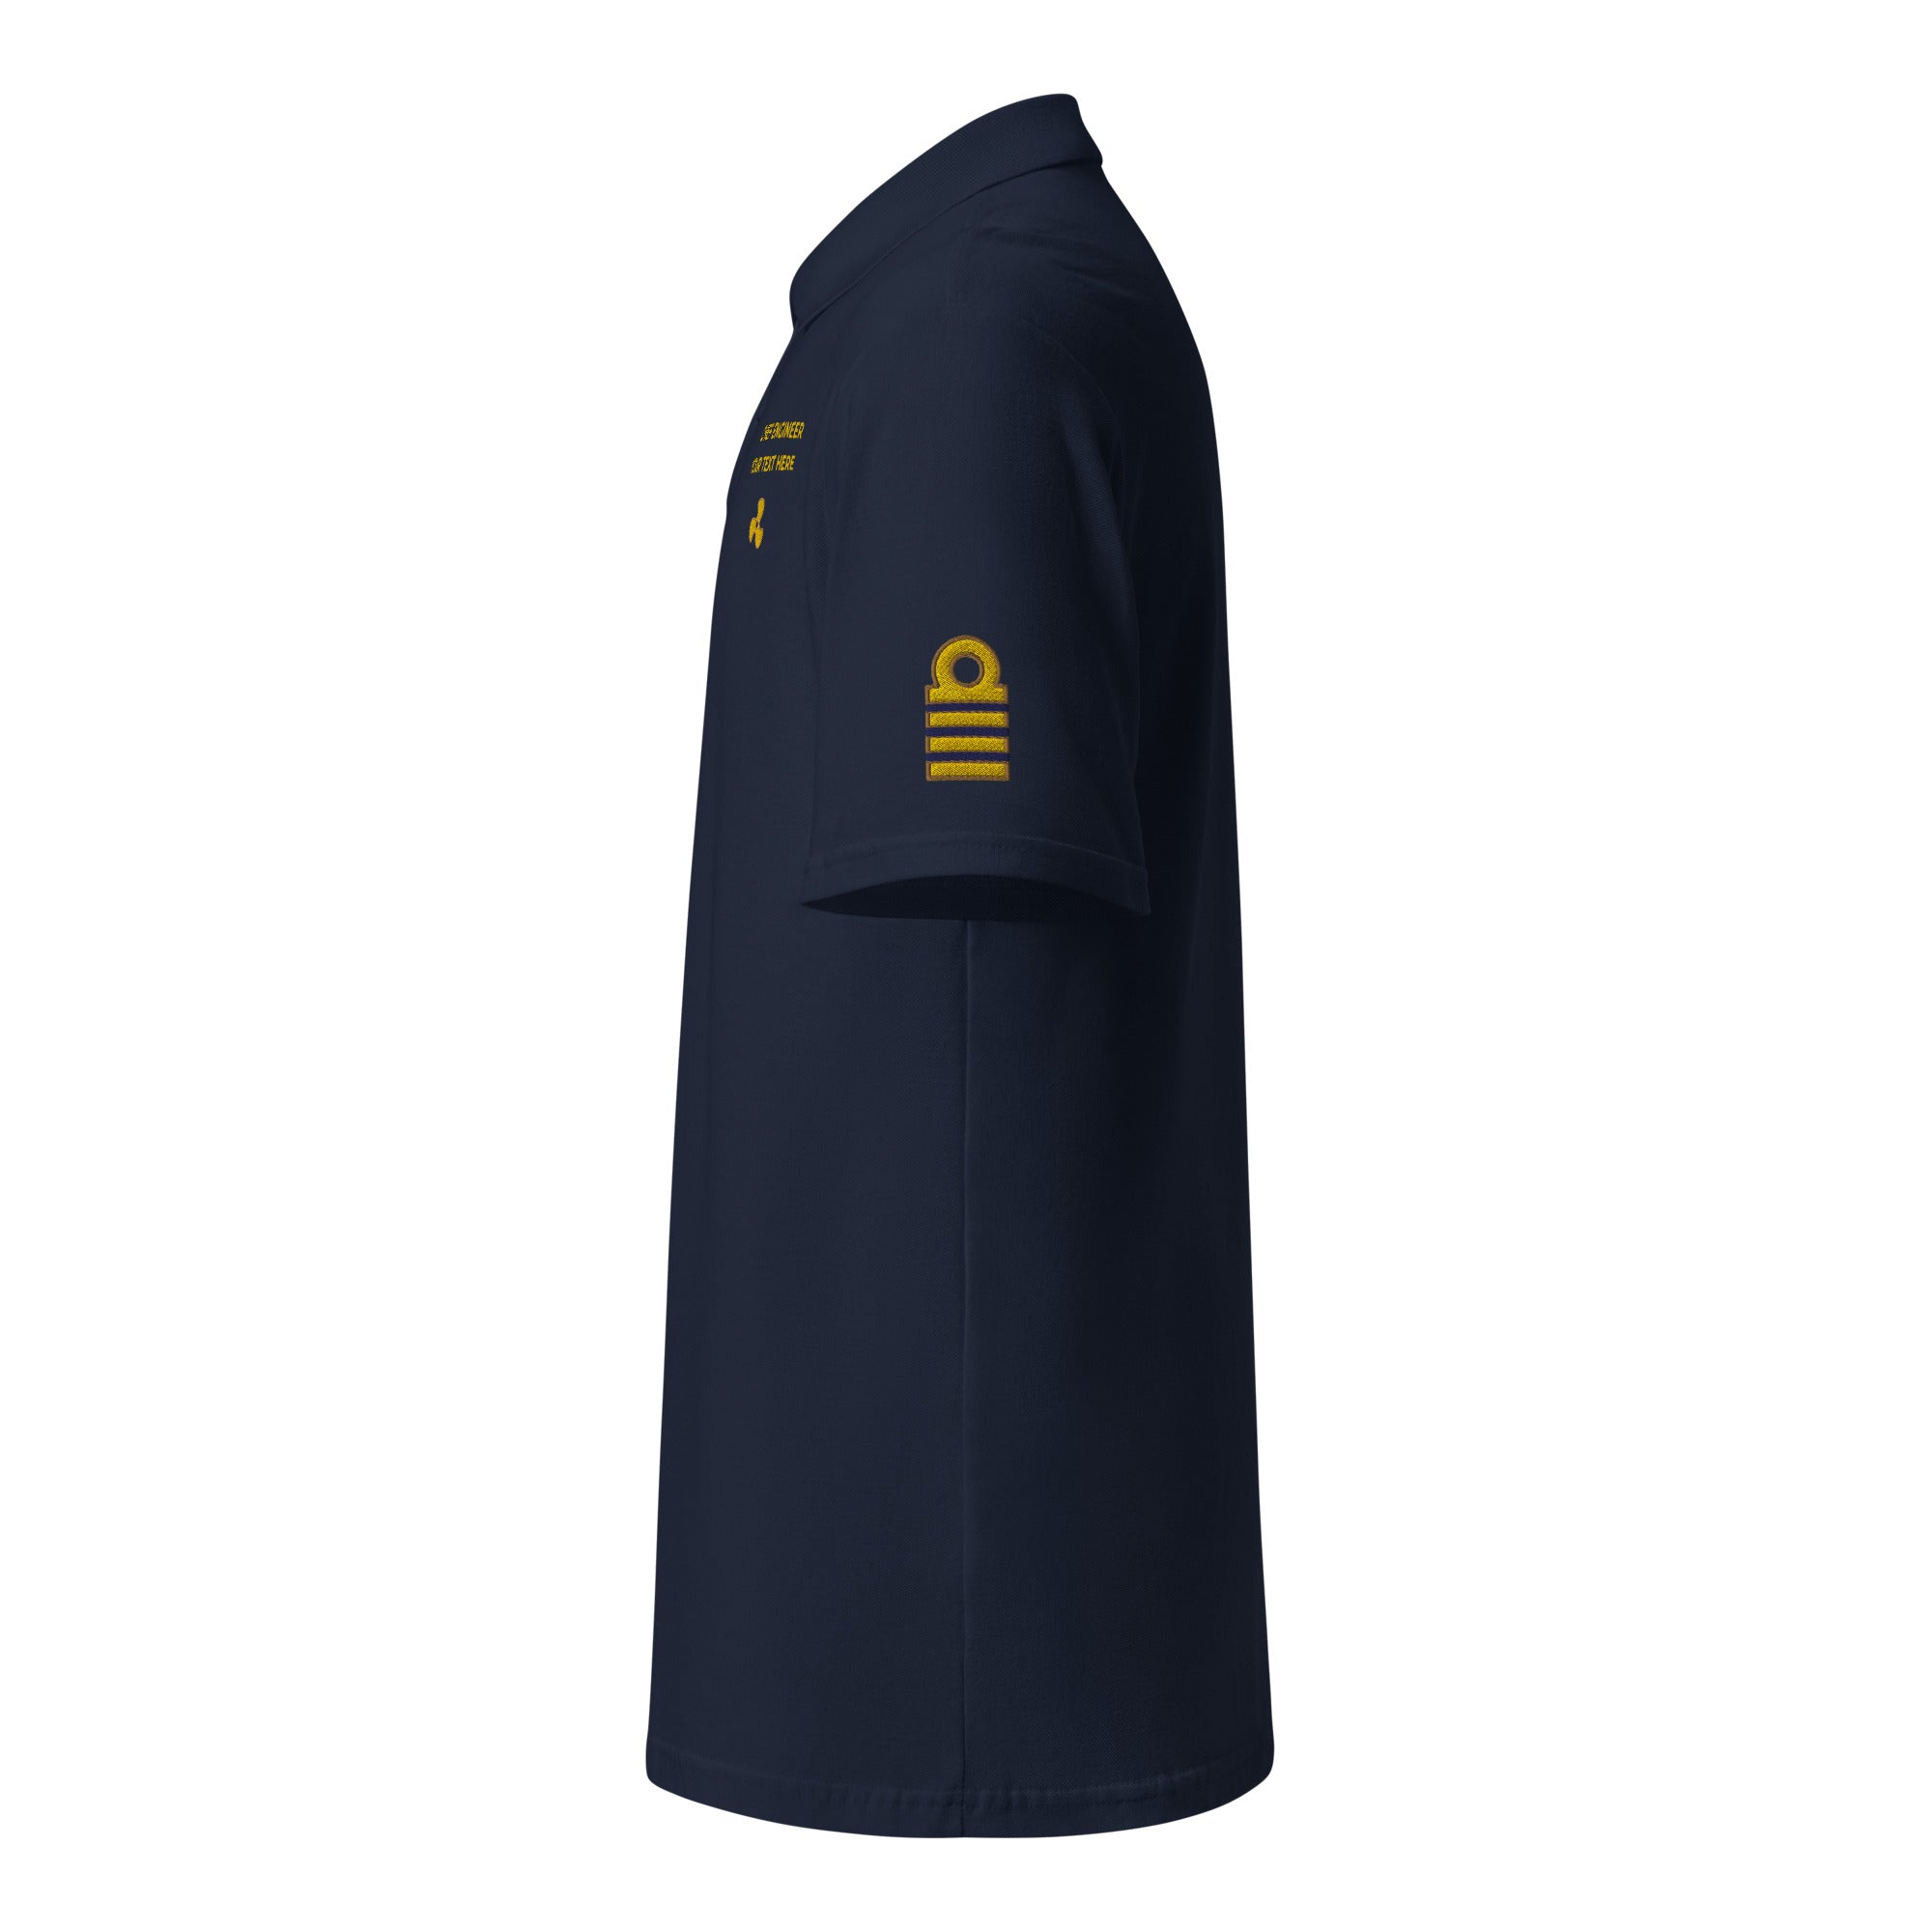 Chief Engineer polo with personalized embroidery (choose epaulettes)